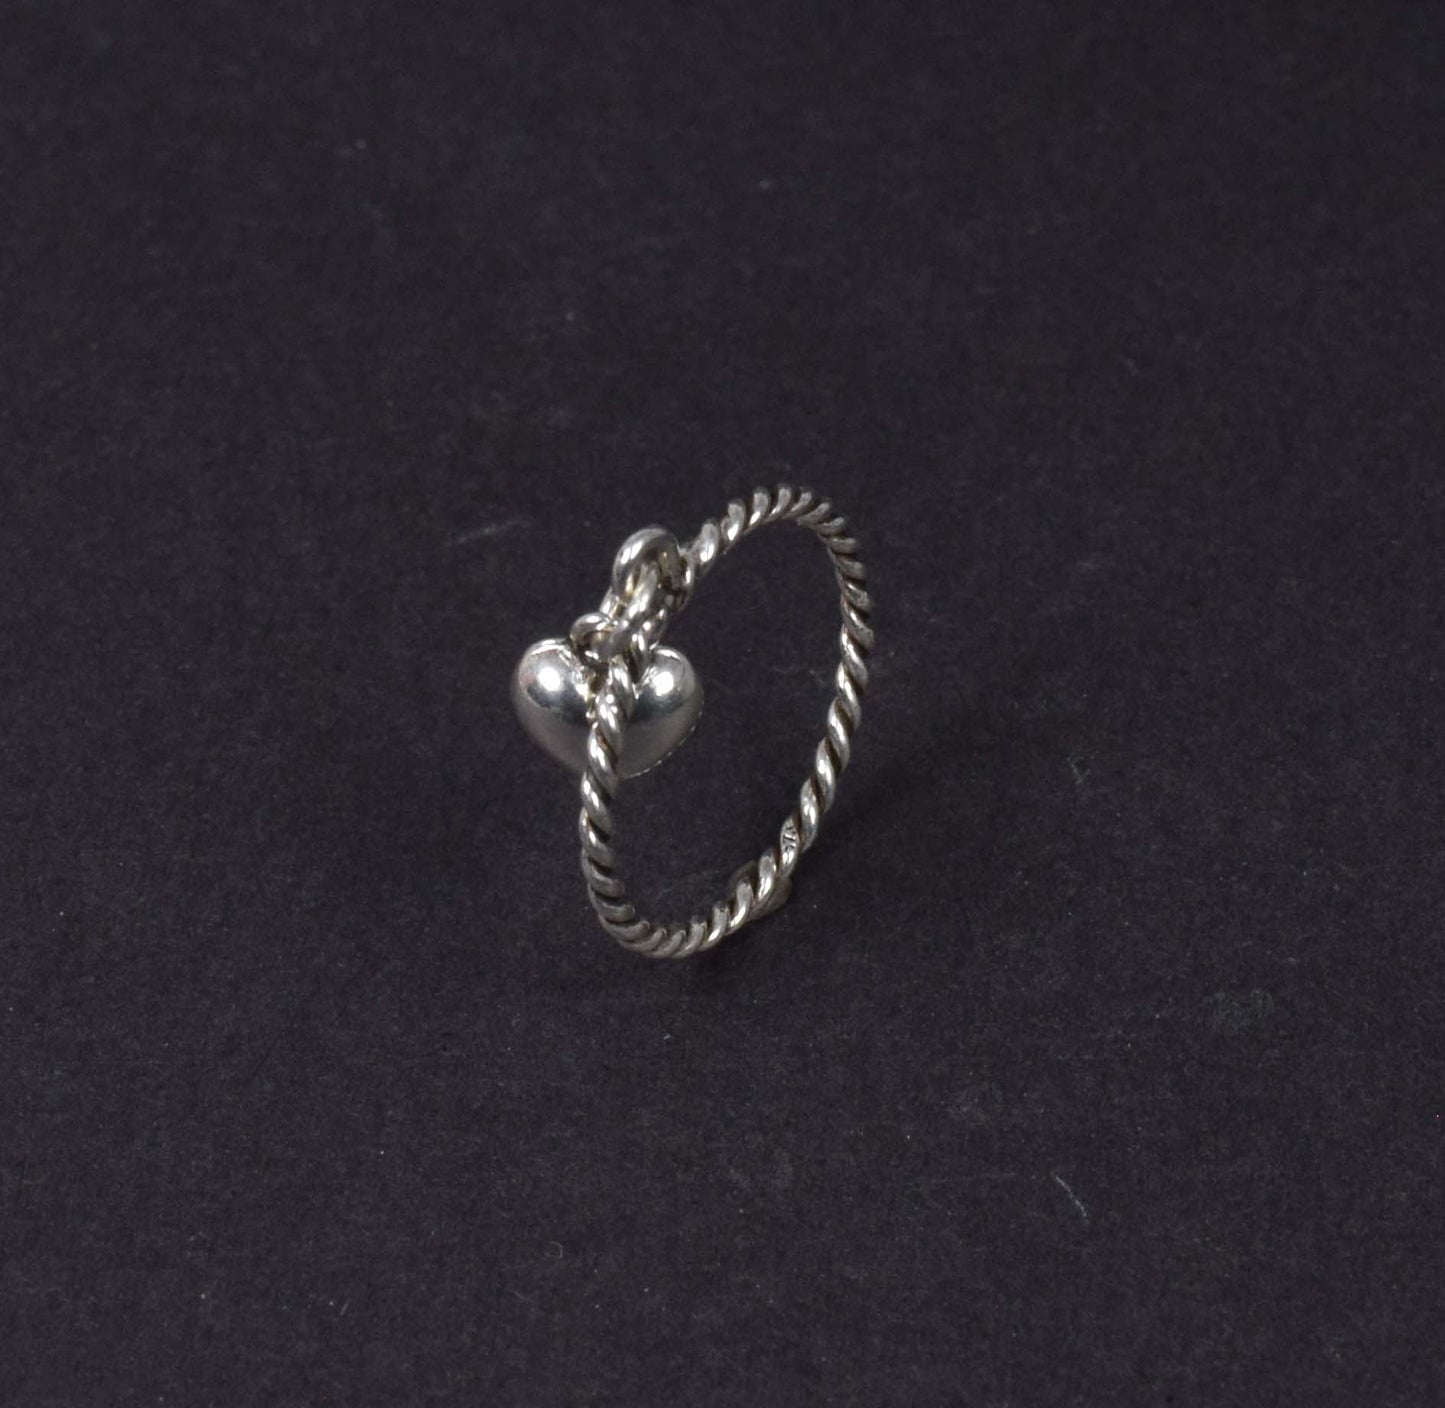 925 Sterling Silver Plain Ring ~ One Mini Puffed Heart Charm Ring